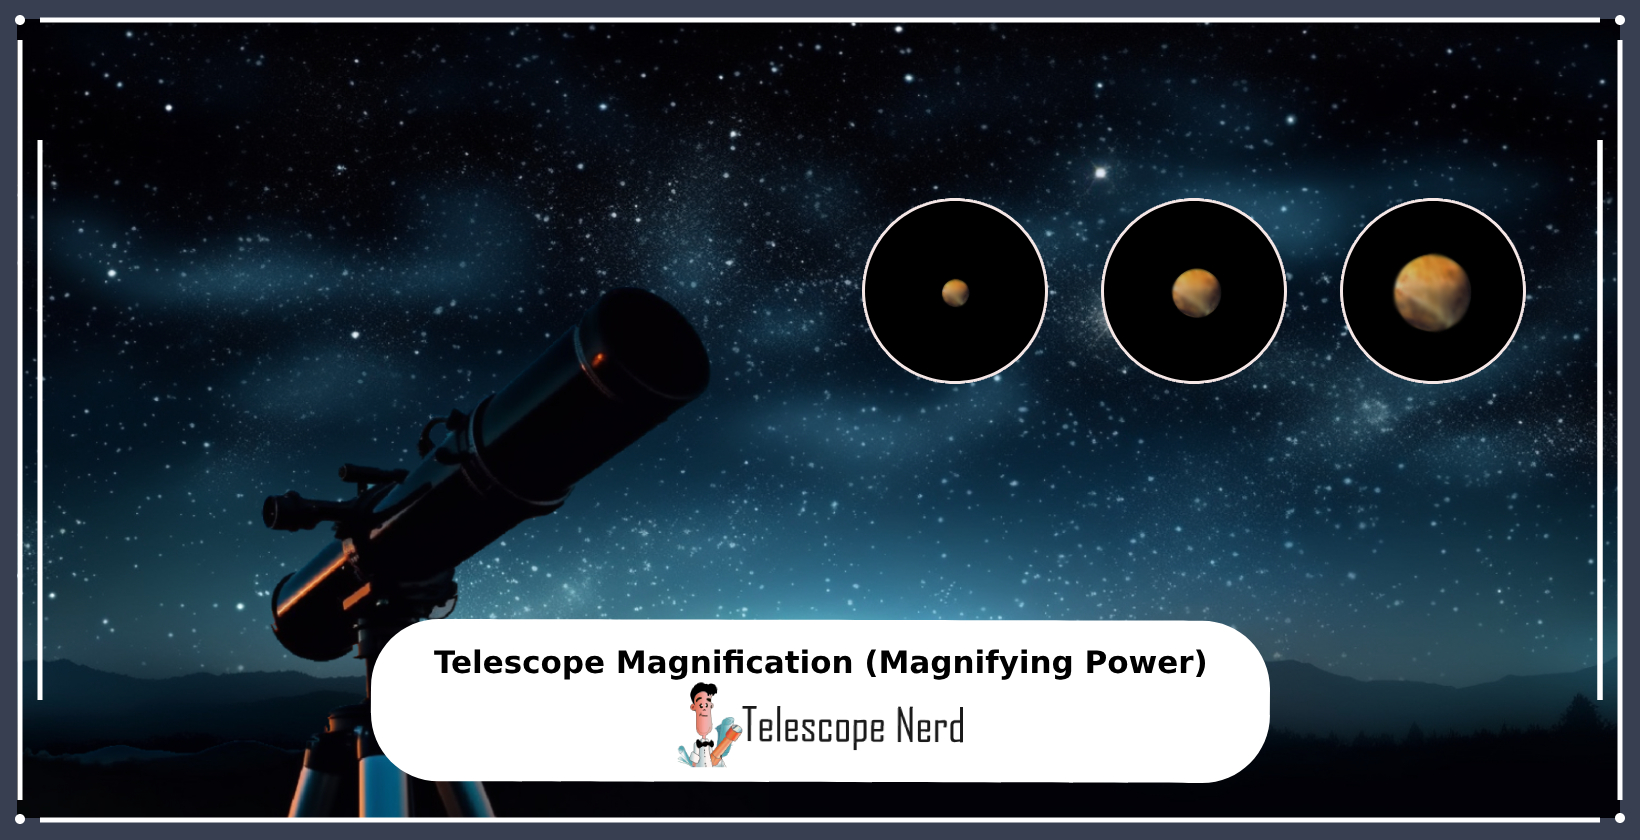 Telescope Magnification (Magnifying Power)